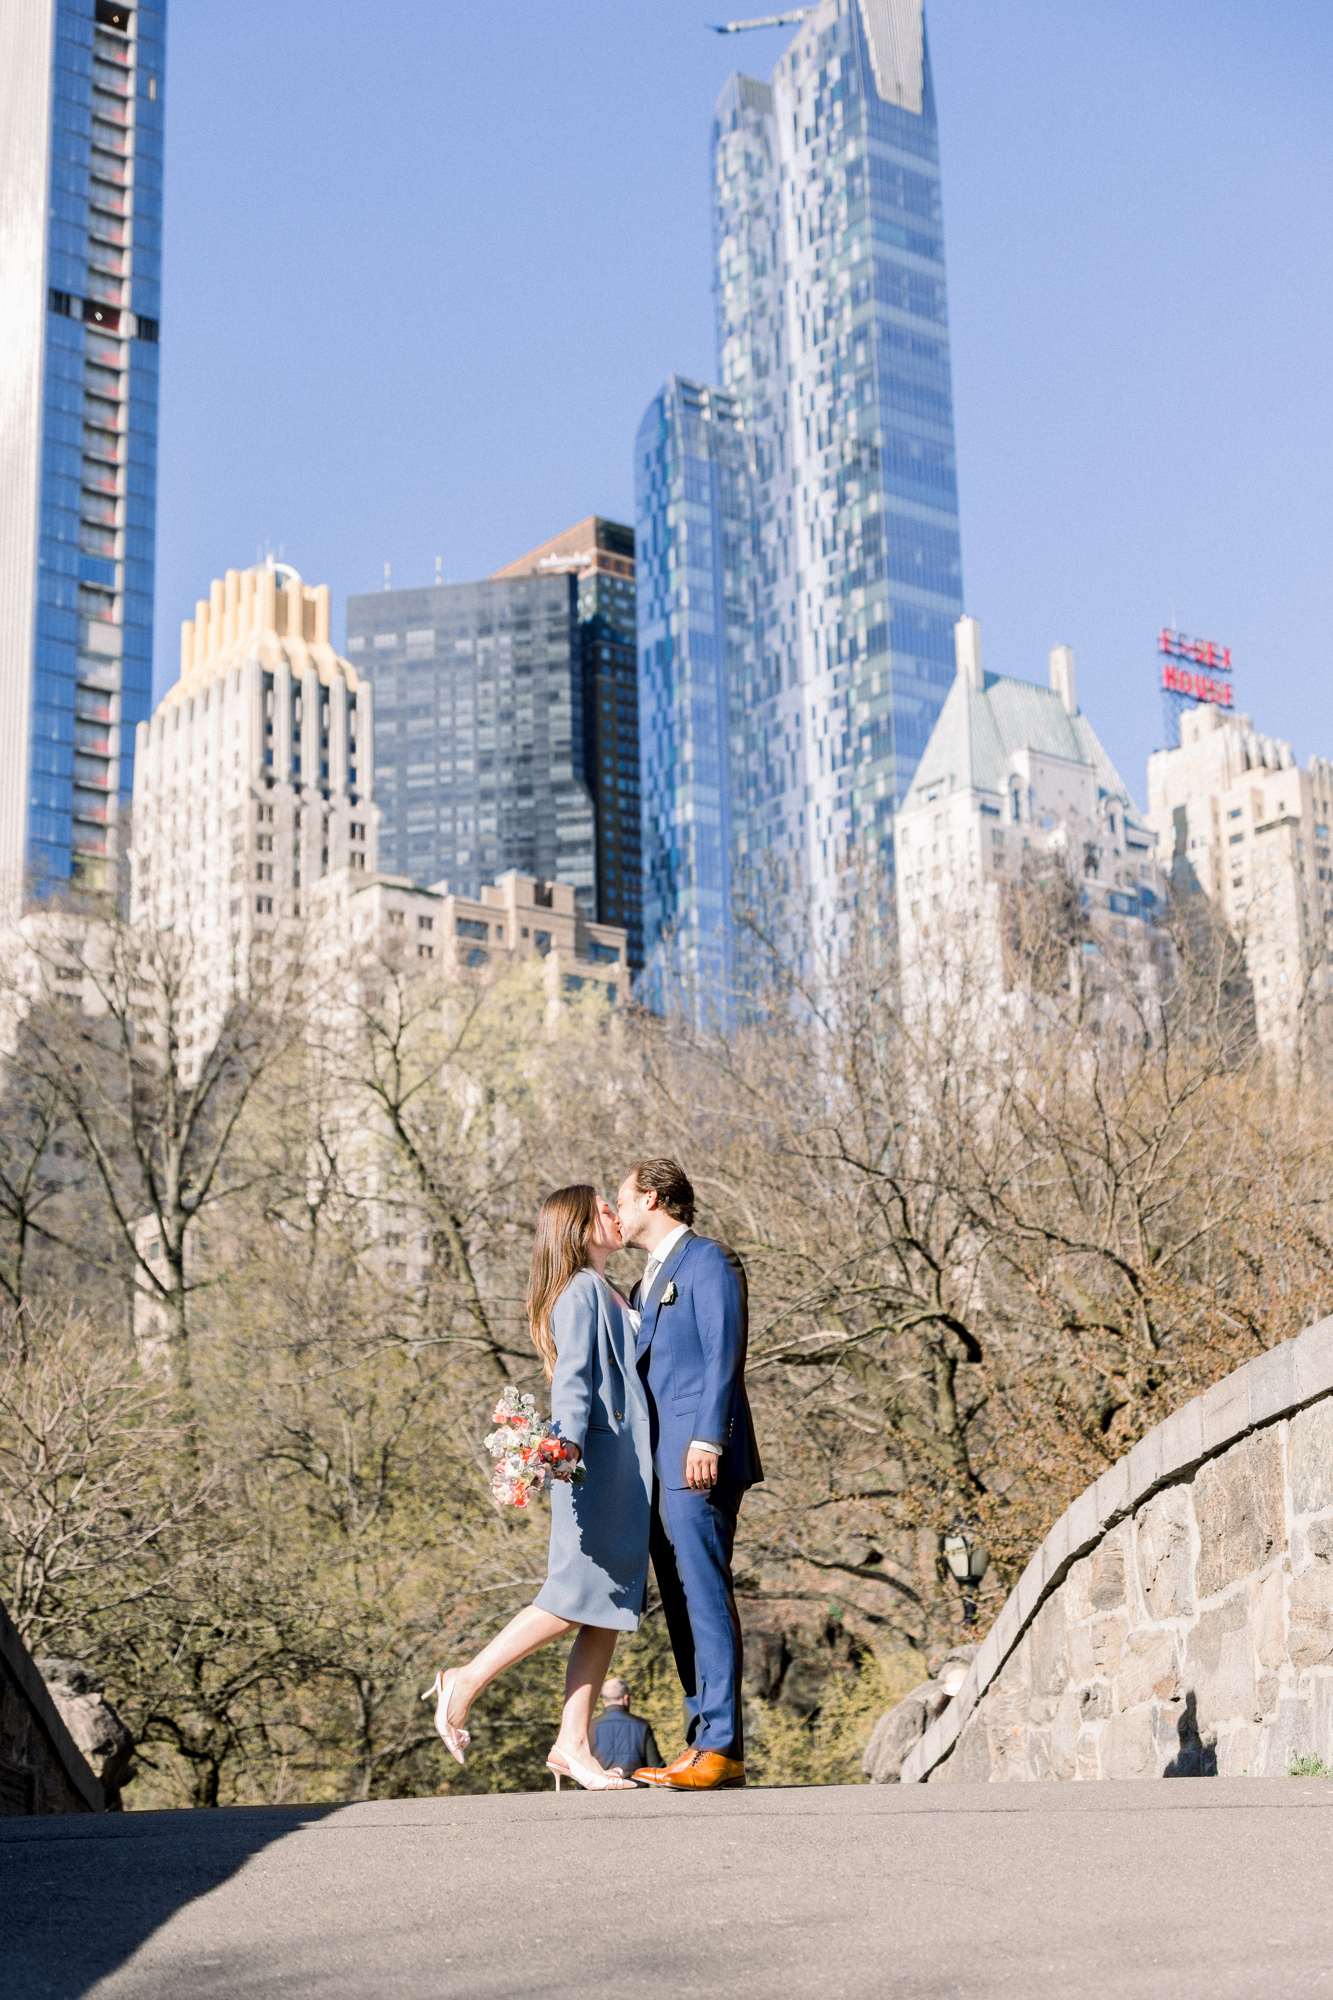 Candid Bow Bridge Wedding Photos Among Central Park's Spring Cherry Blossoms